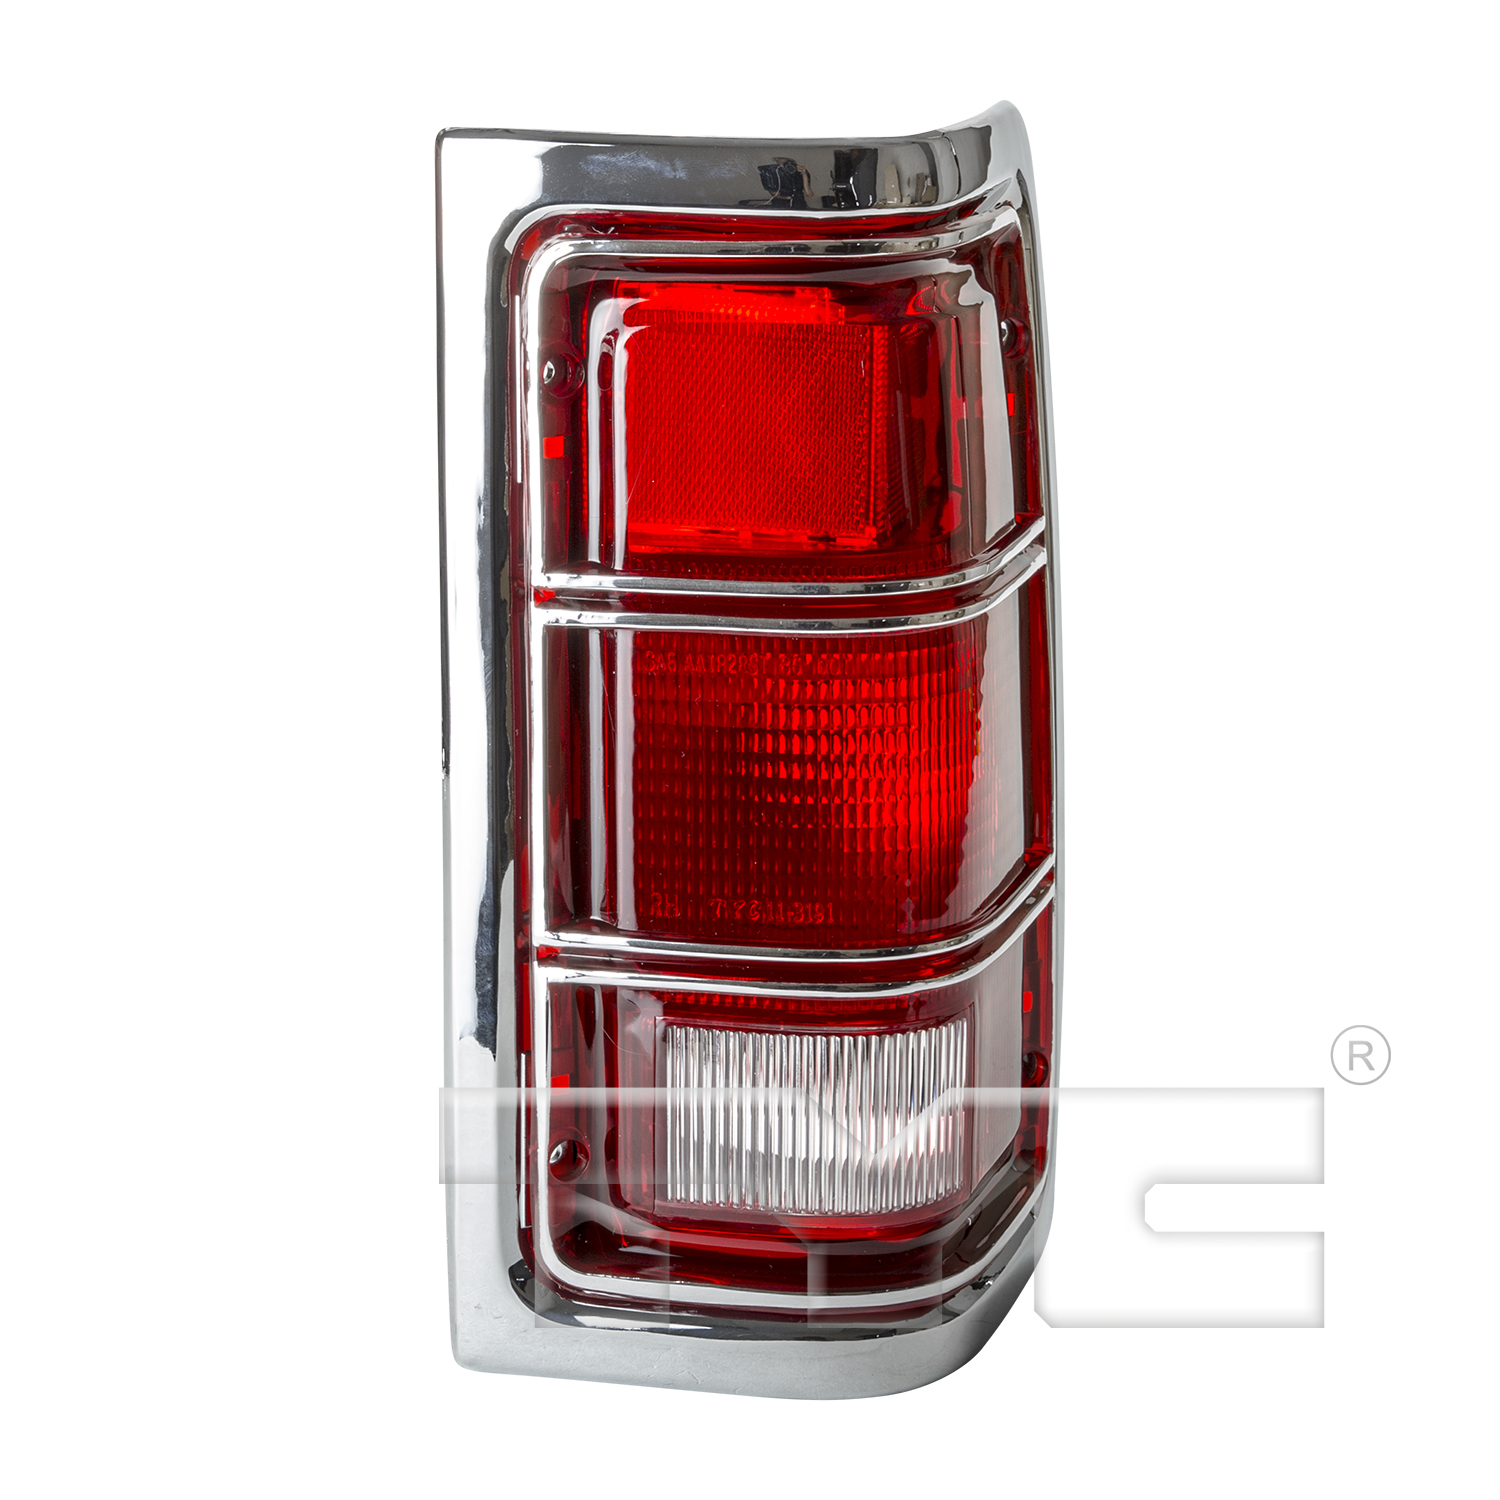 Aftermarket TAILLIGHTS for DODGE - W150, W150,81-87,RT Taillamp lens